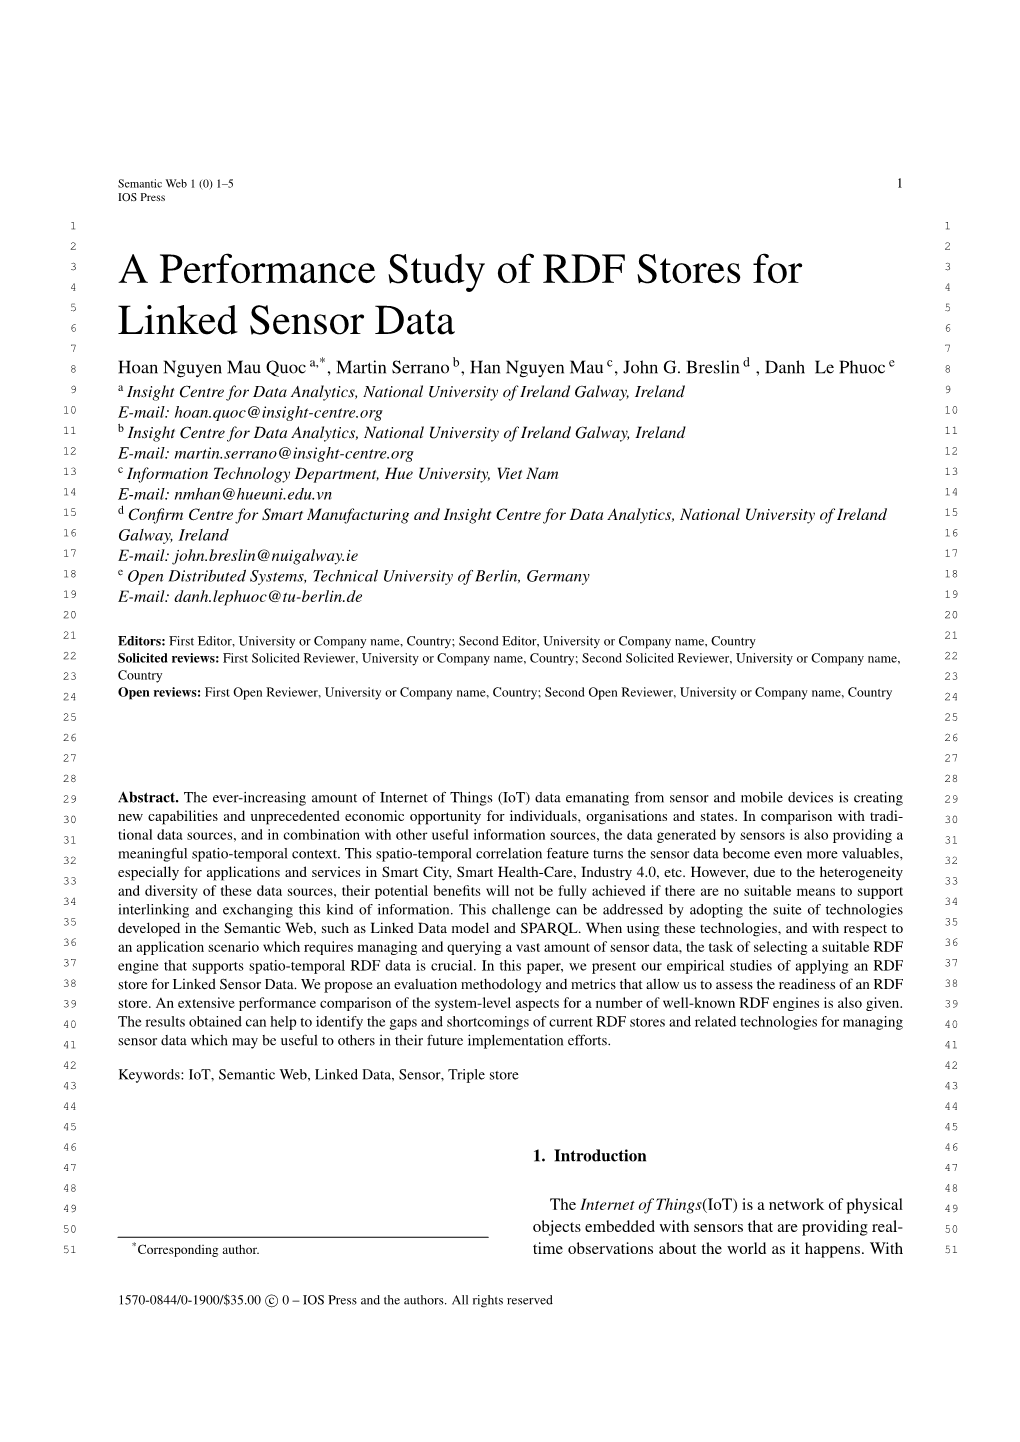 A Performance Study of RDF Stores for Linked Sensor Data